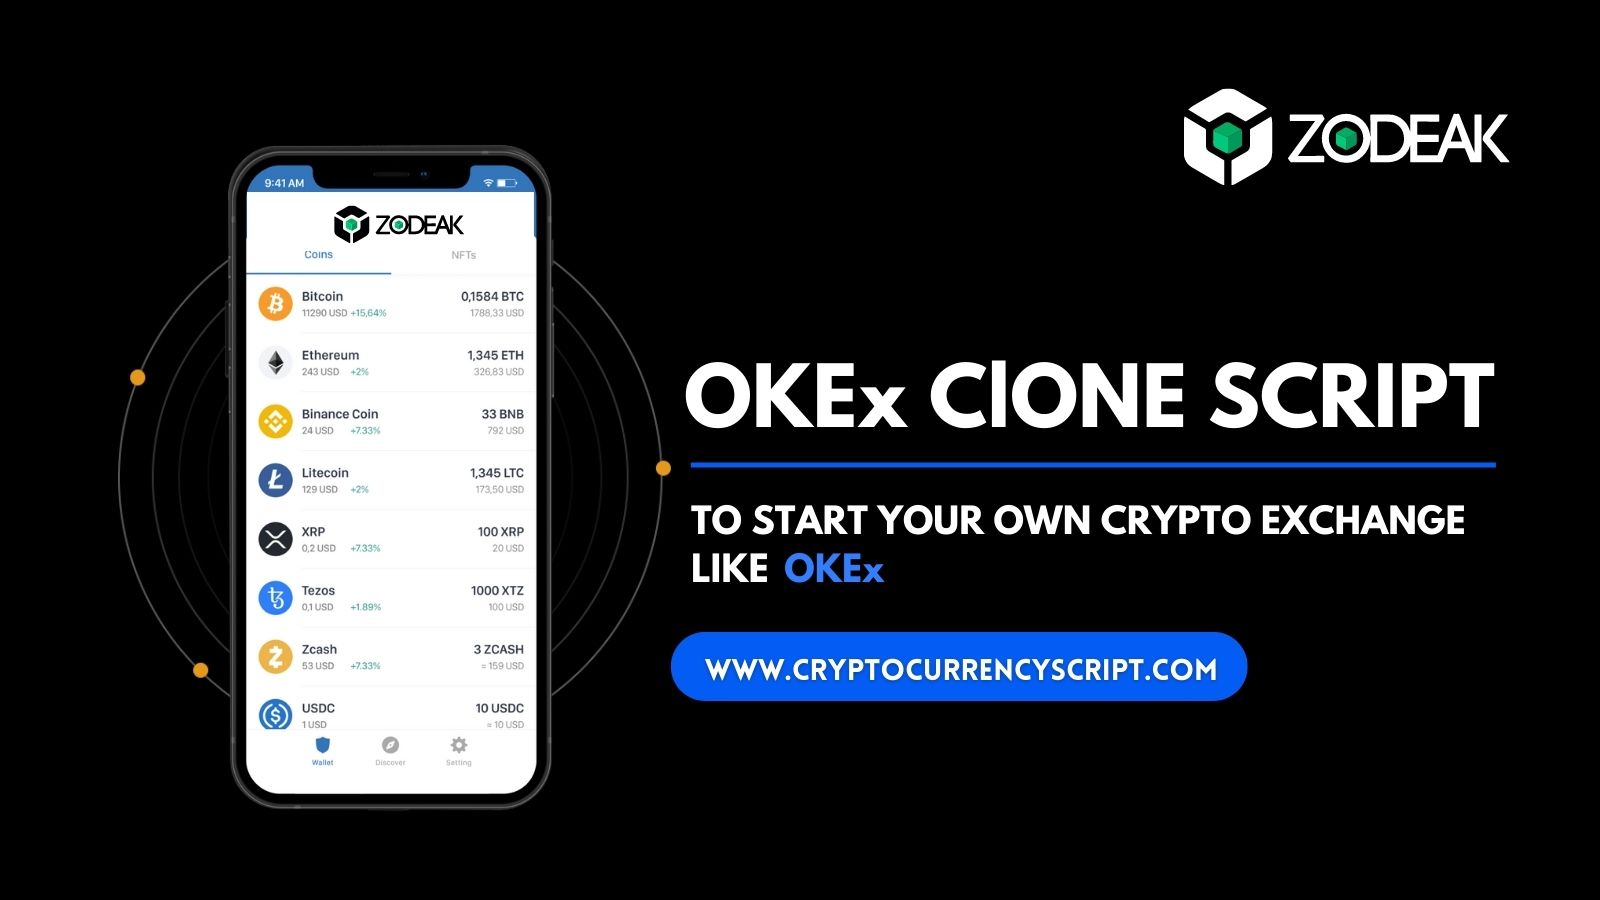 OKEx Clone Script – To Start Your Own Crypto Exchange Like OKEx